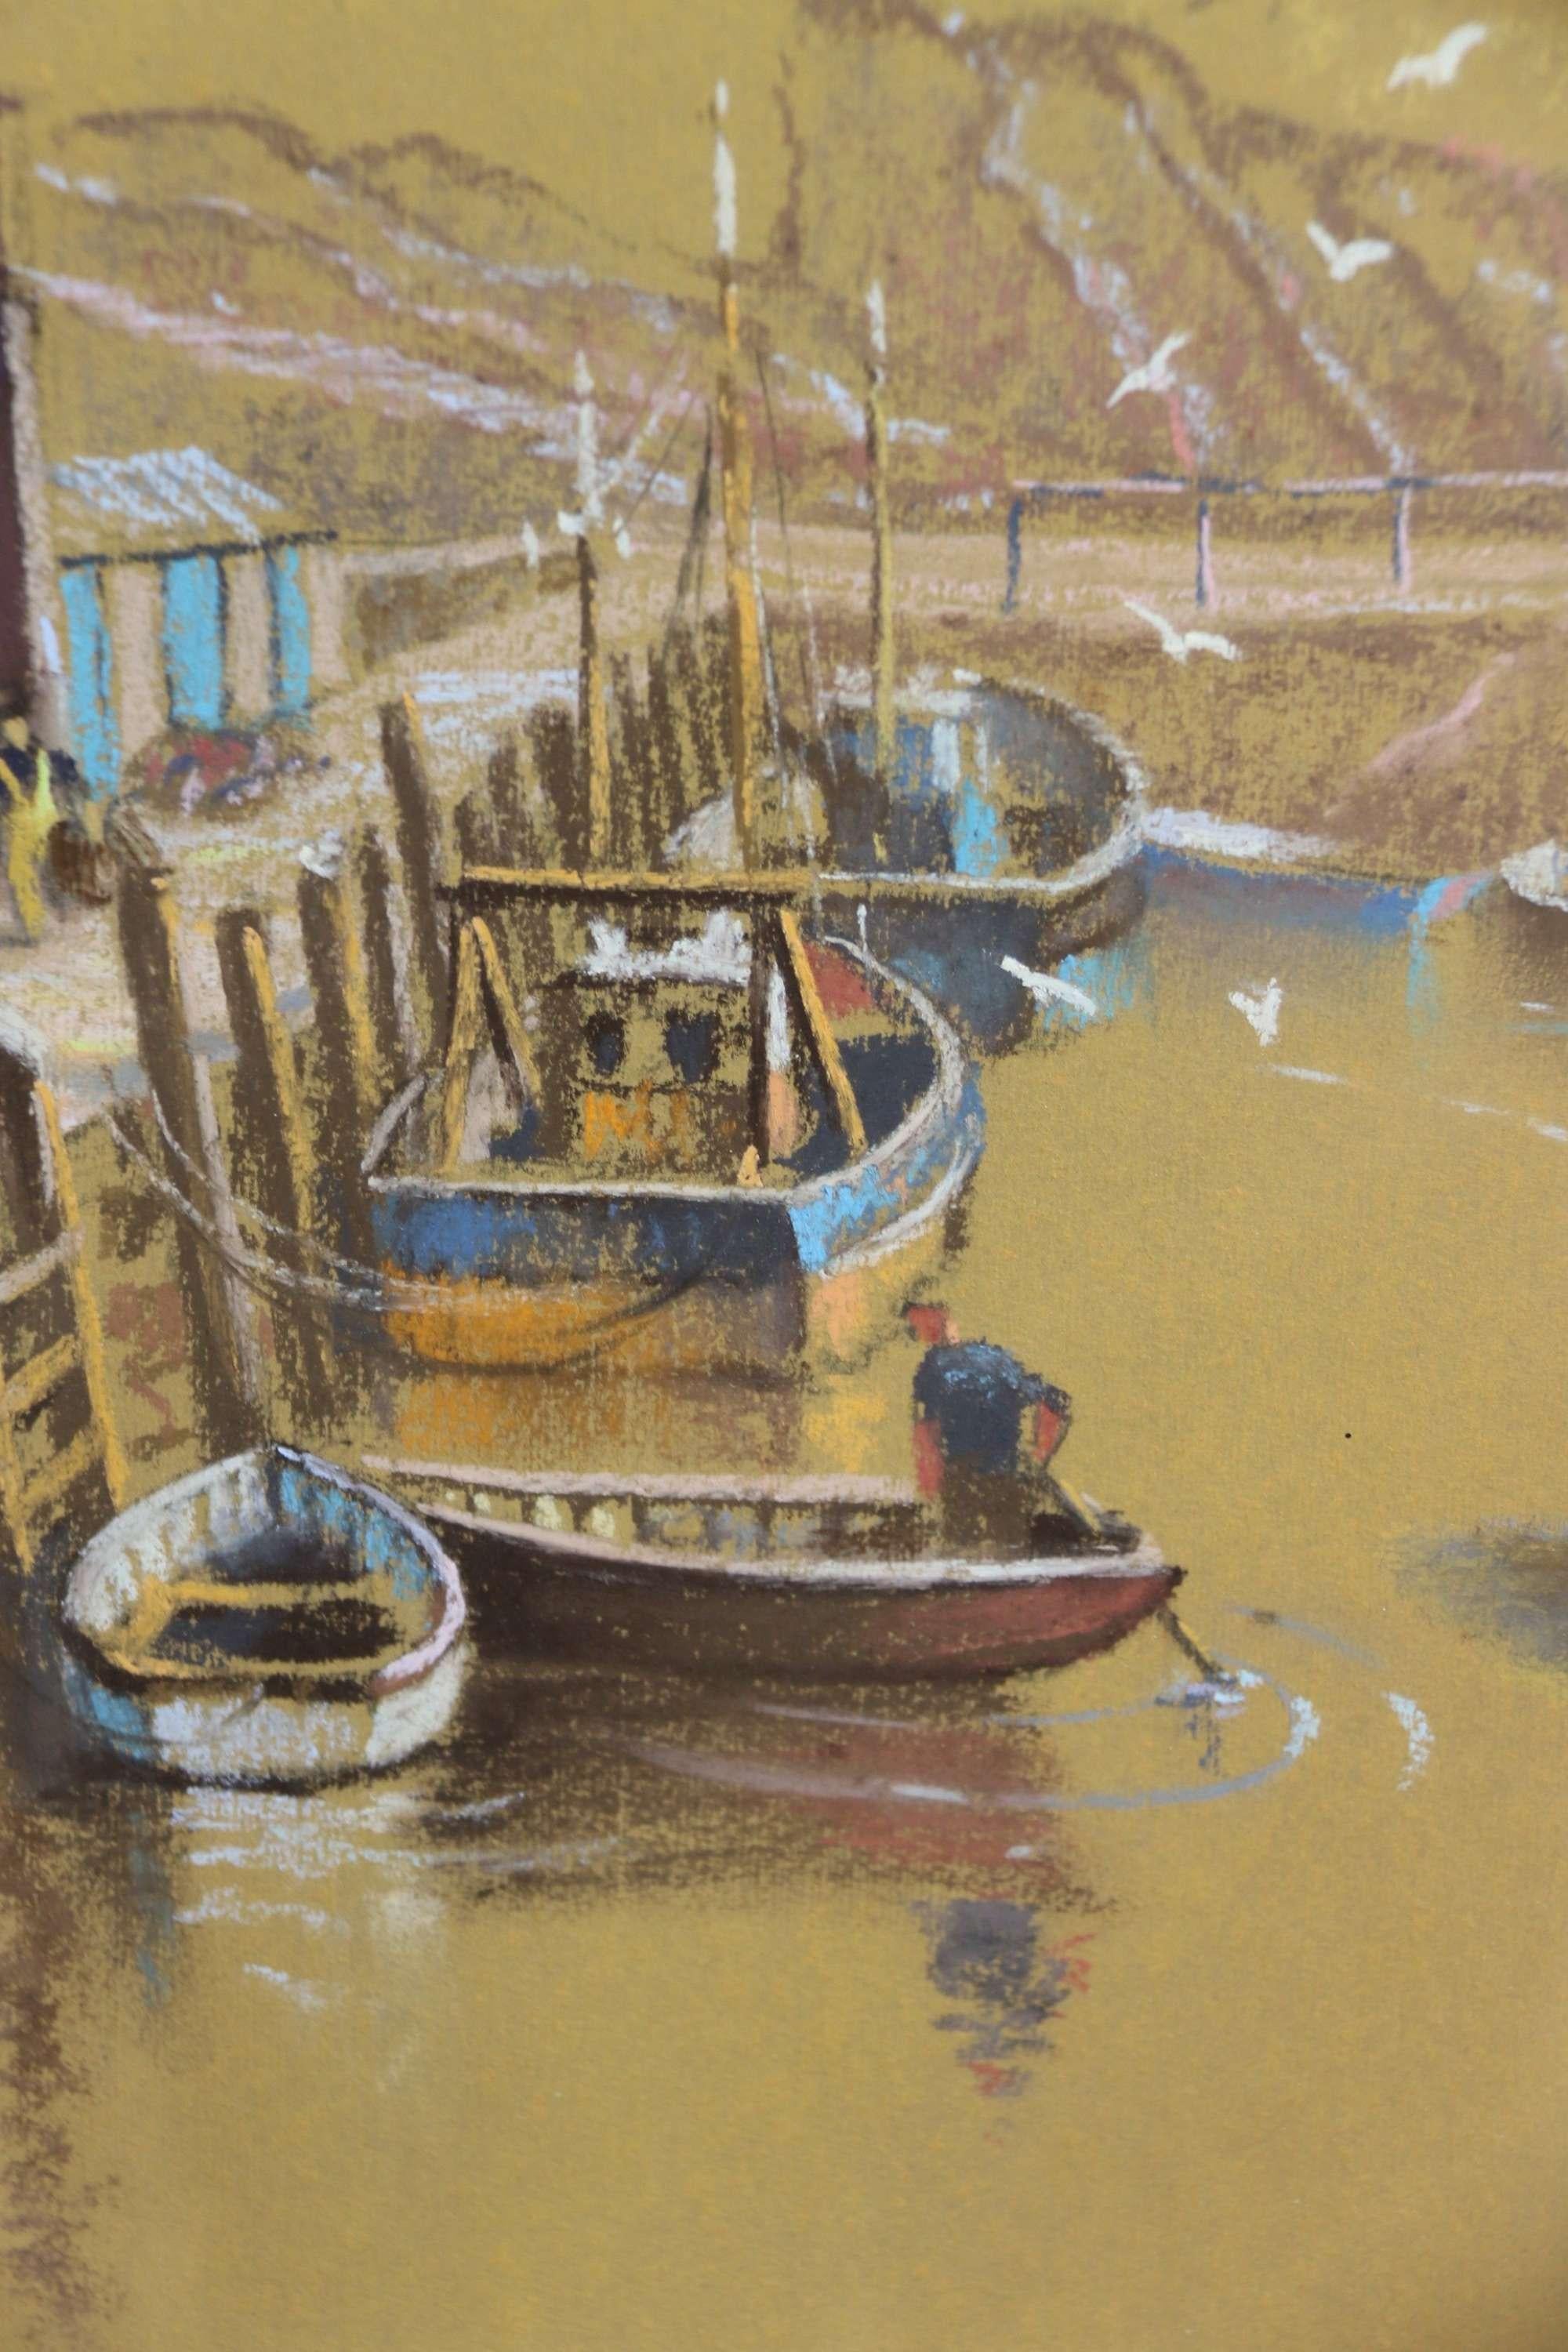 A Delightful Pastel Drawing of The Harbour Polperro, Cornwall C 1950 by Roy Stringfellow

This very well drawn and executed 1950s pastel view of the idyllic Polperro fishing harbour shows moored boats and fishermen at their work with seagulls flying